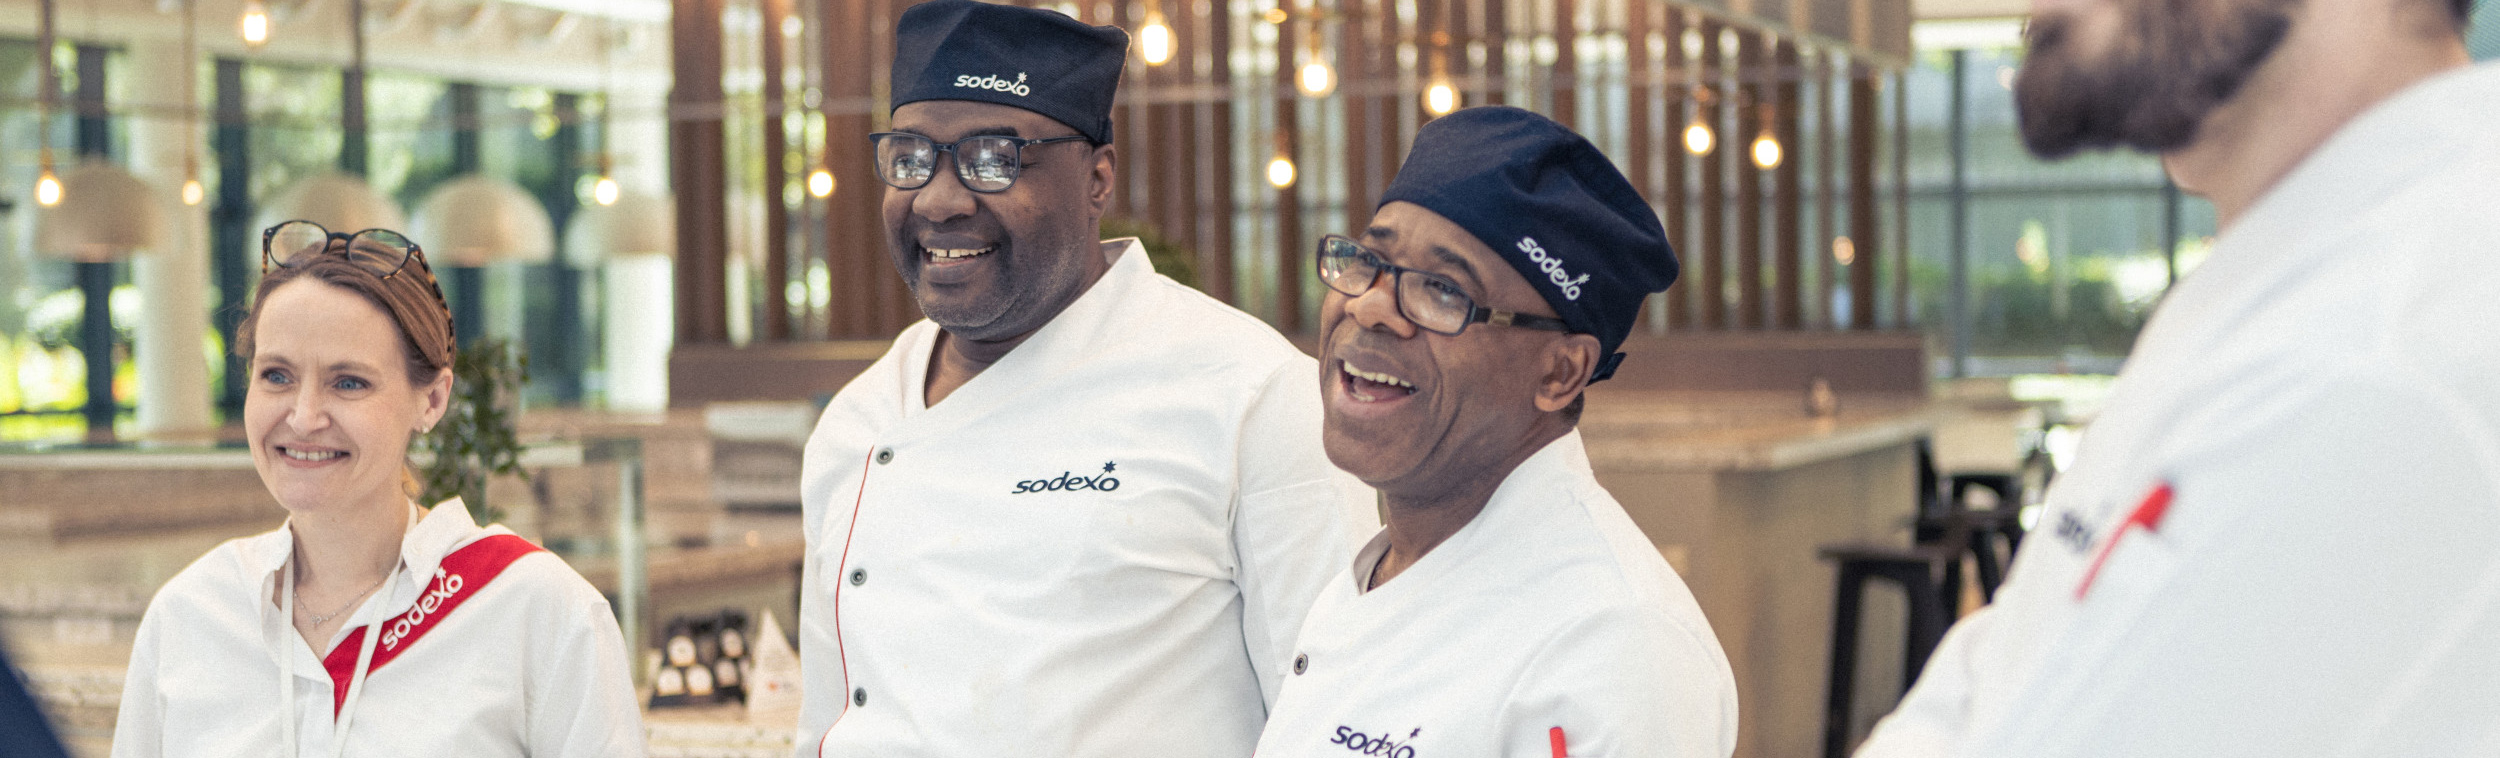 Four diverse Sodexo employees laughing